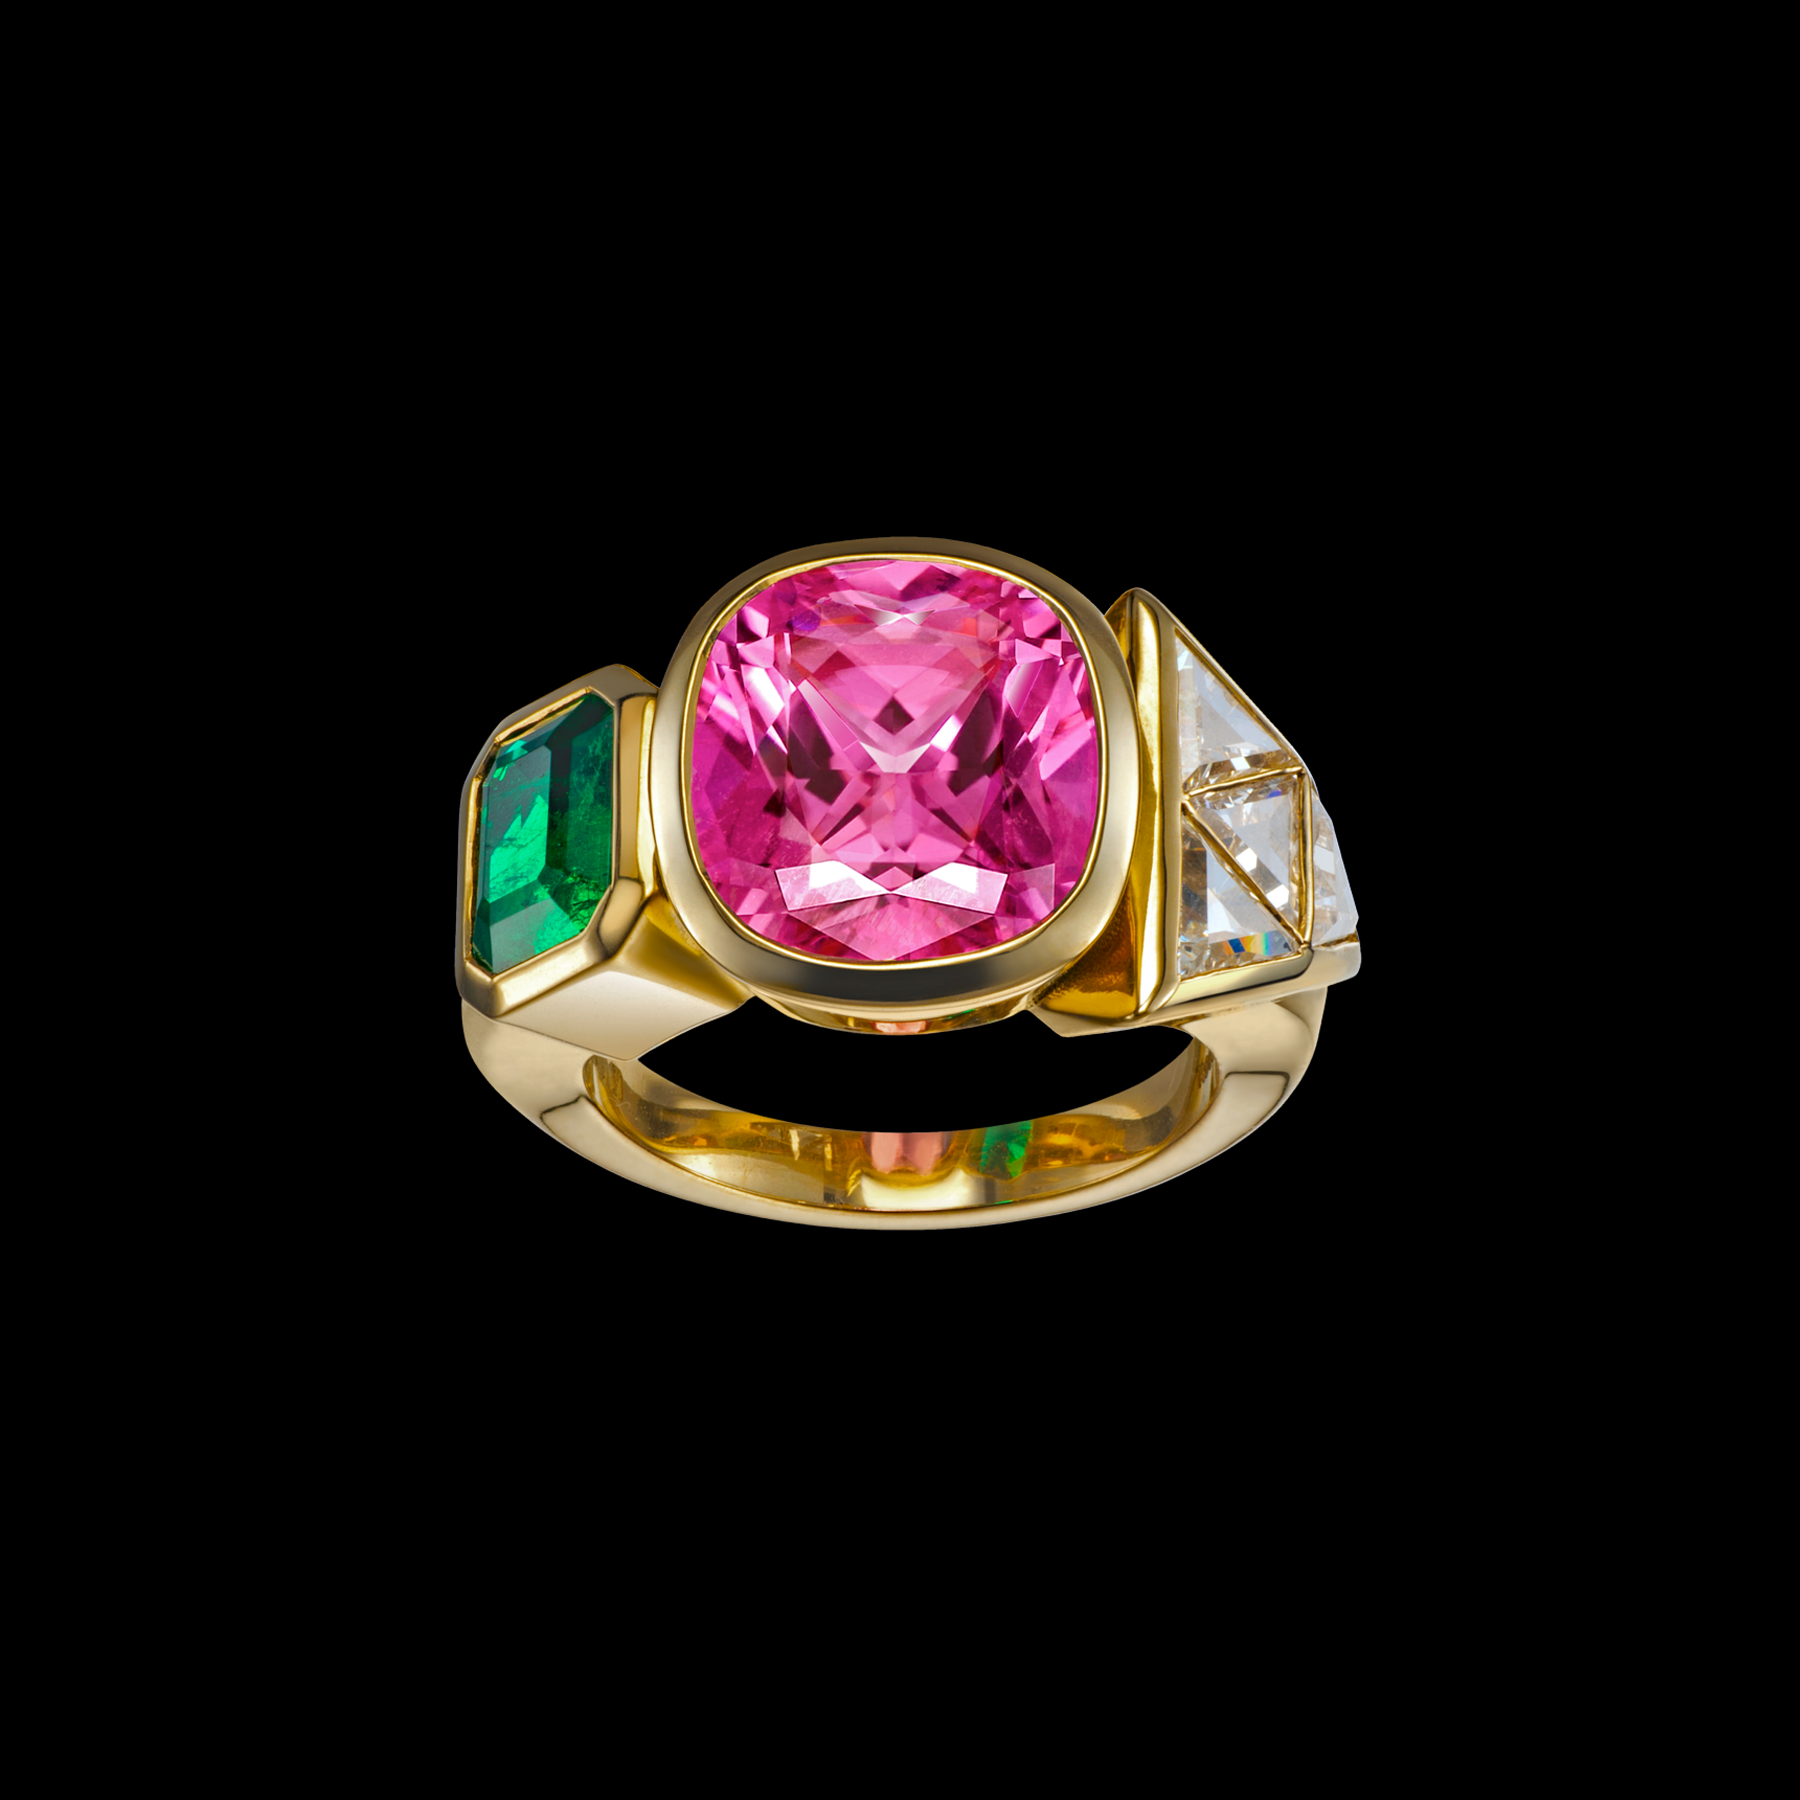 Edible ring by designer Solange Azagury-Partridge - 18k Yellow Gold, Pink Sapphire - front view